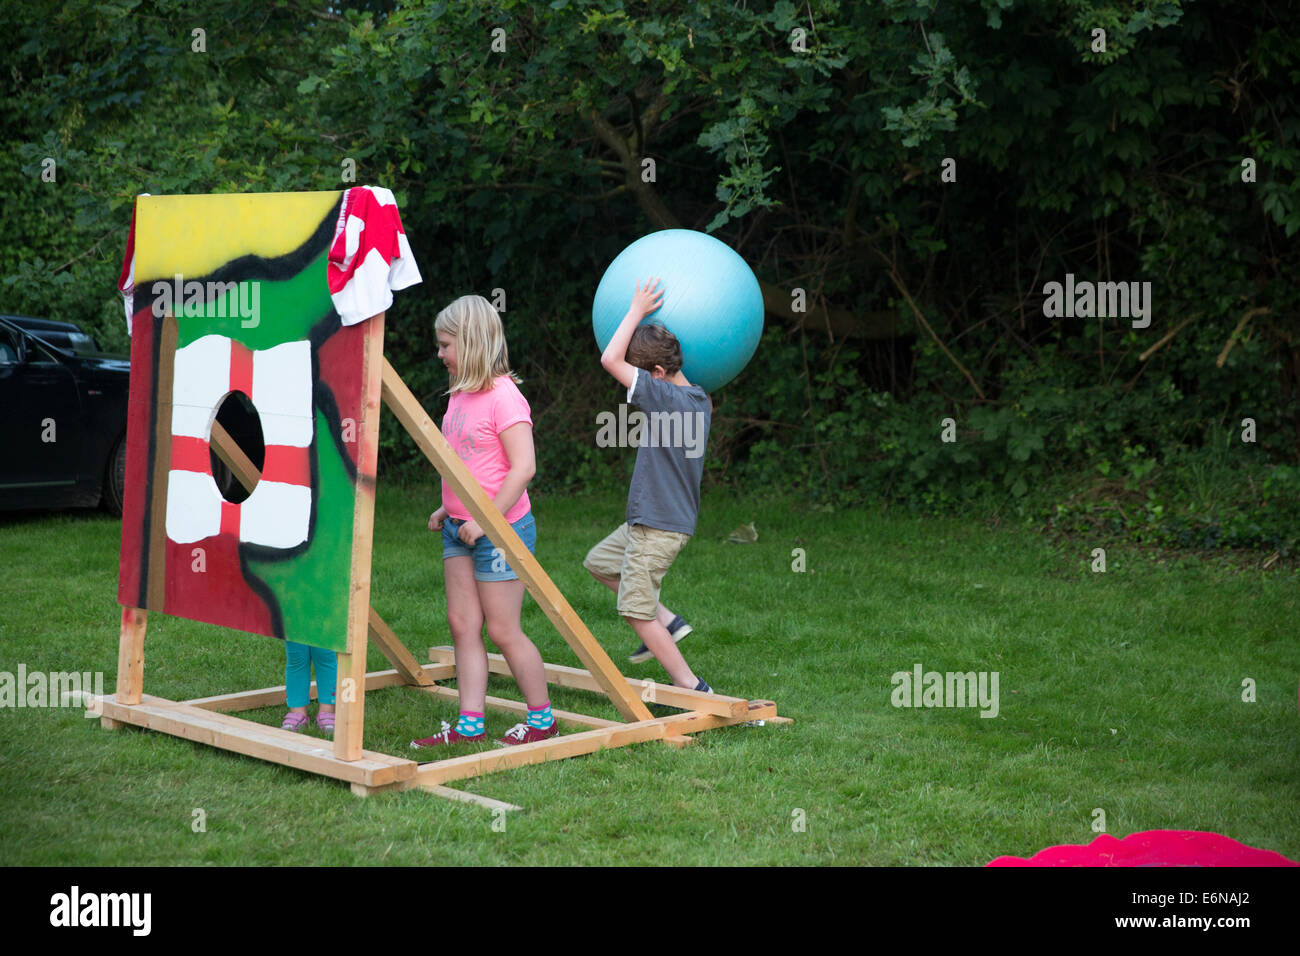 children playing at charity fundraising event Stock Photo